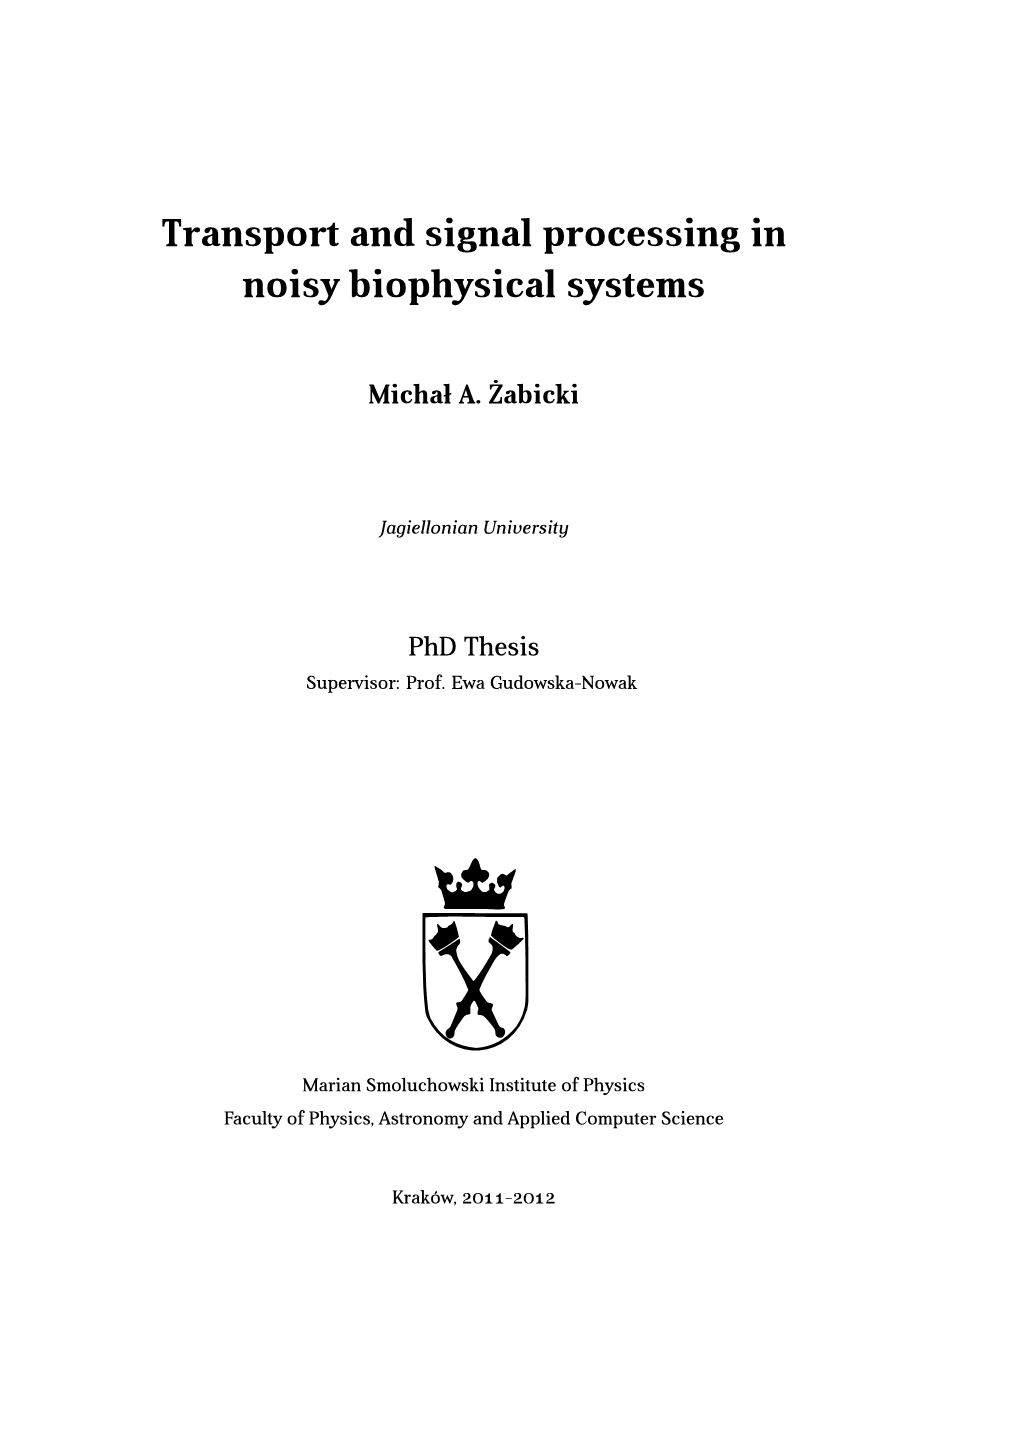 Transport and Signal Processing in Noisy Biophysical Systems